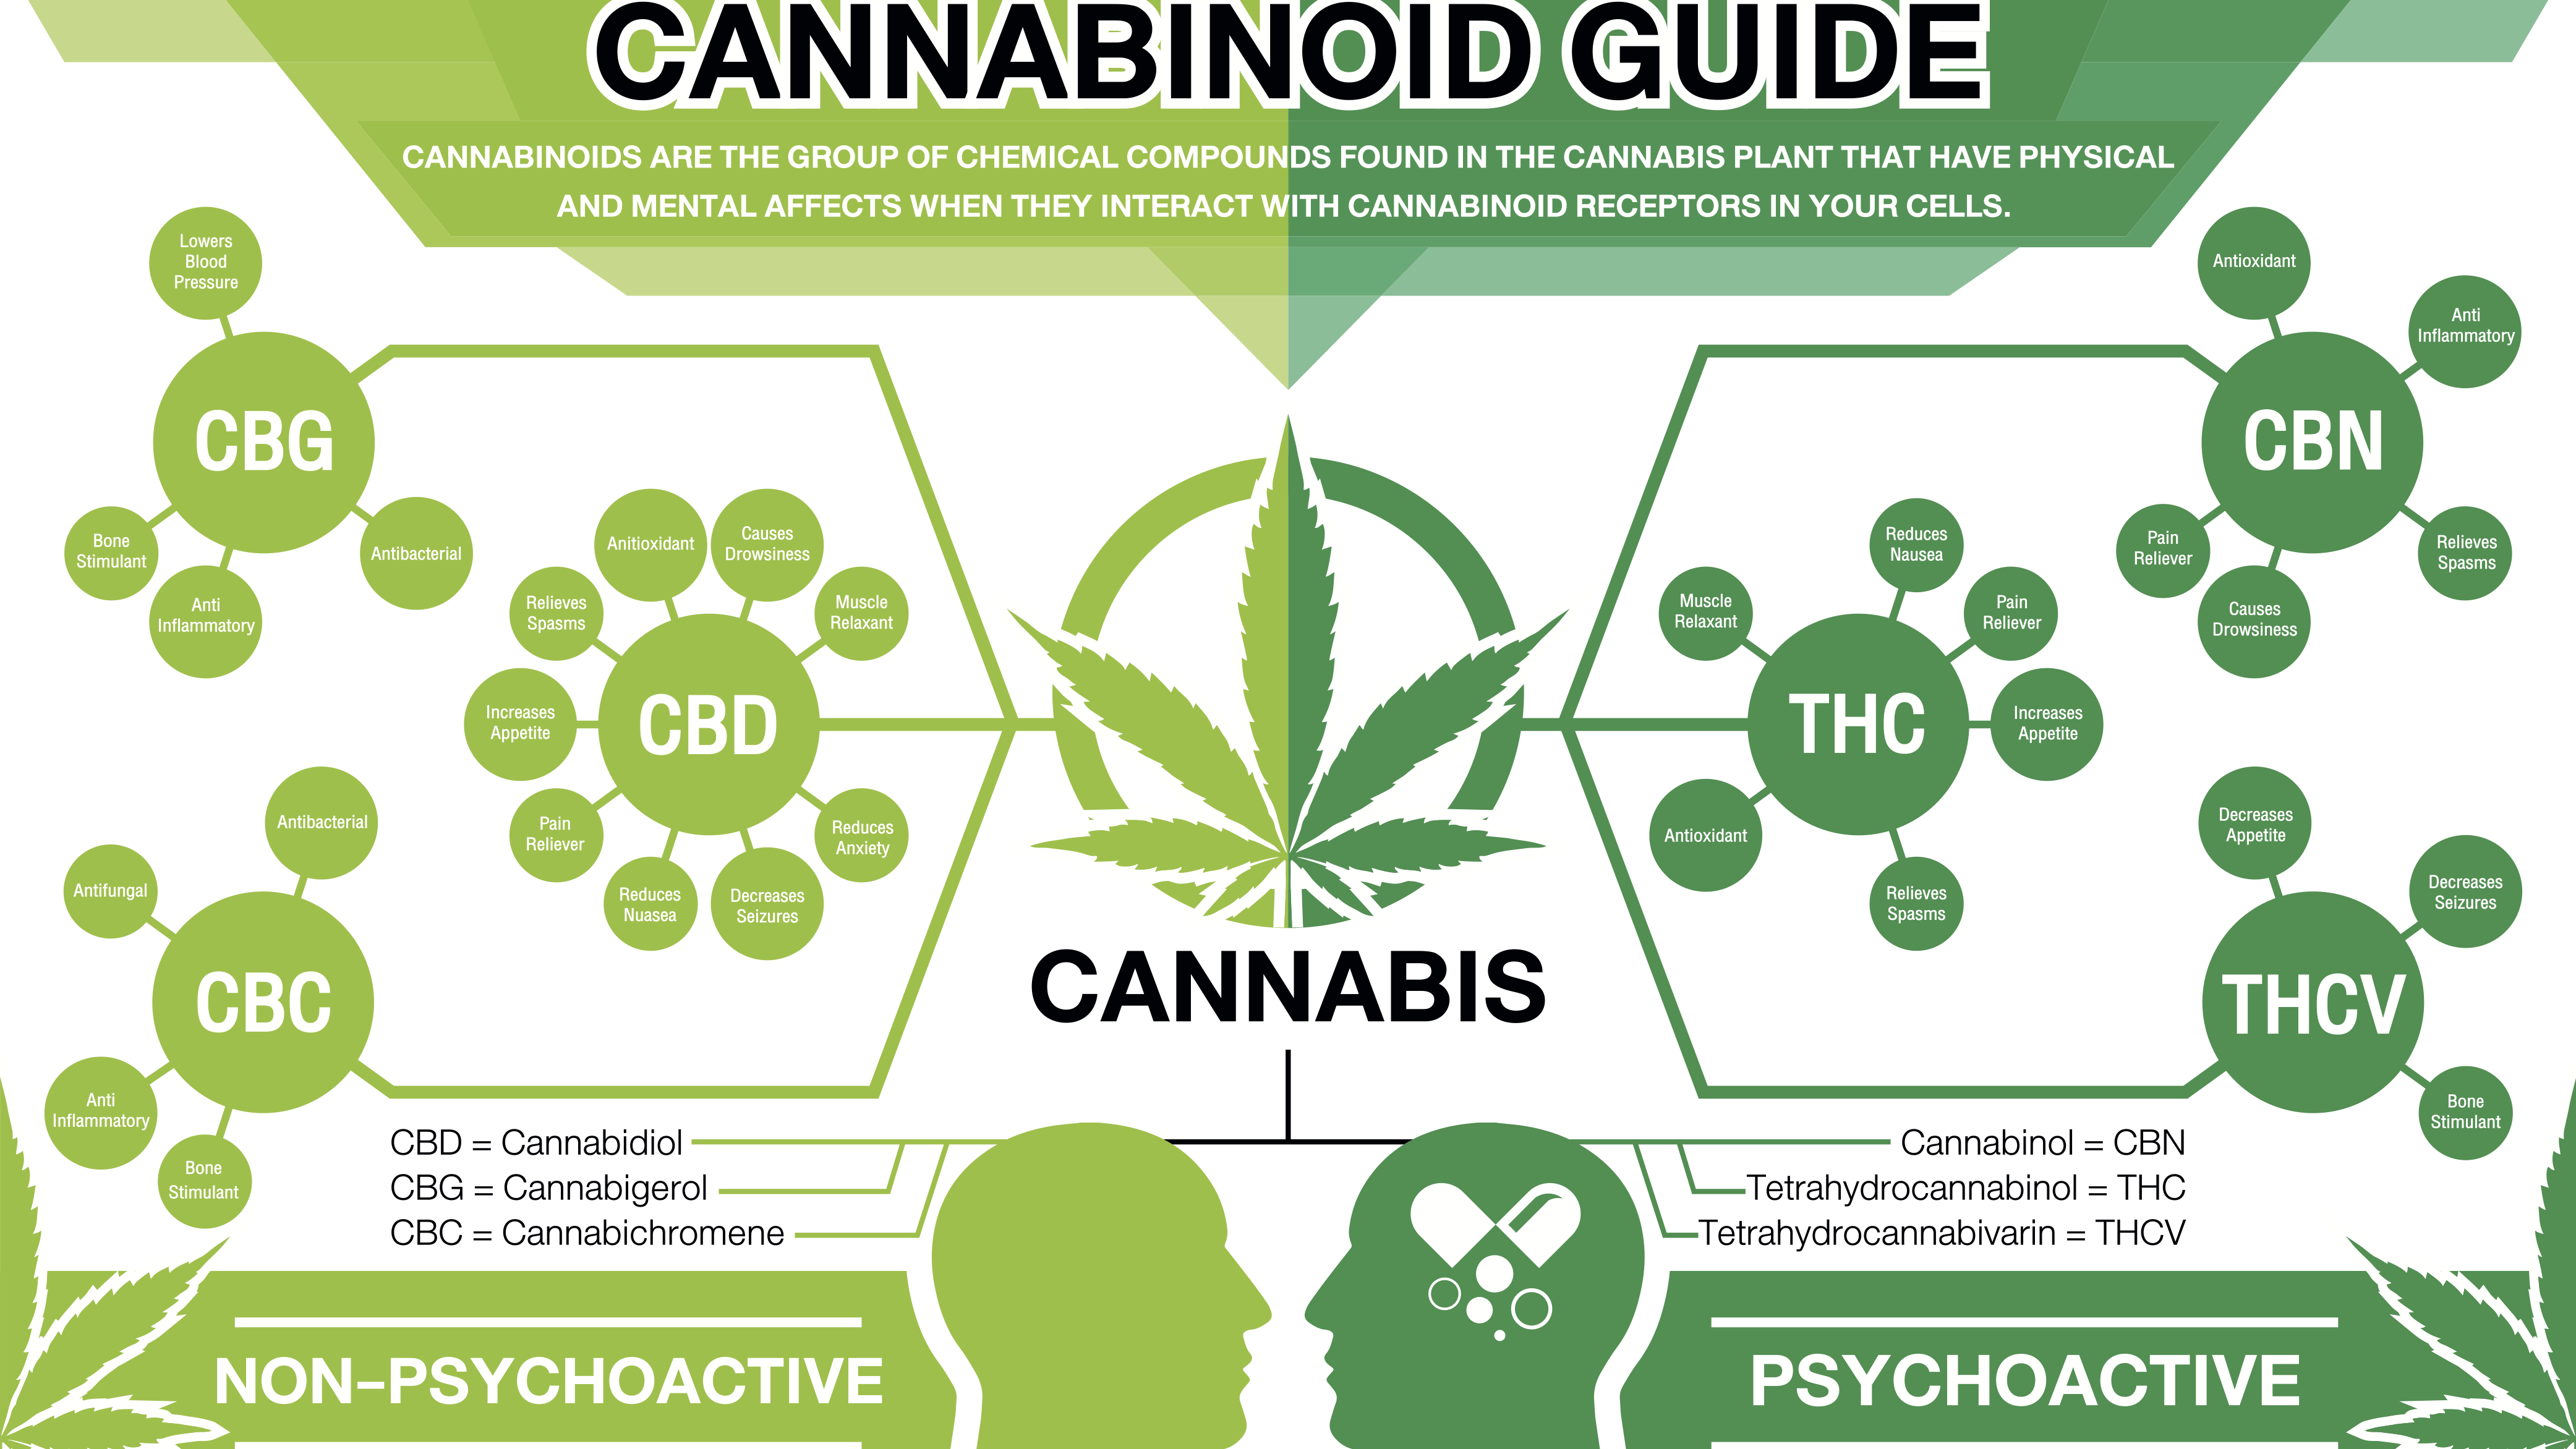 WHAT IS A CANNABINOID